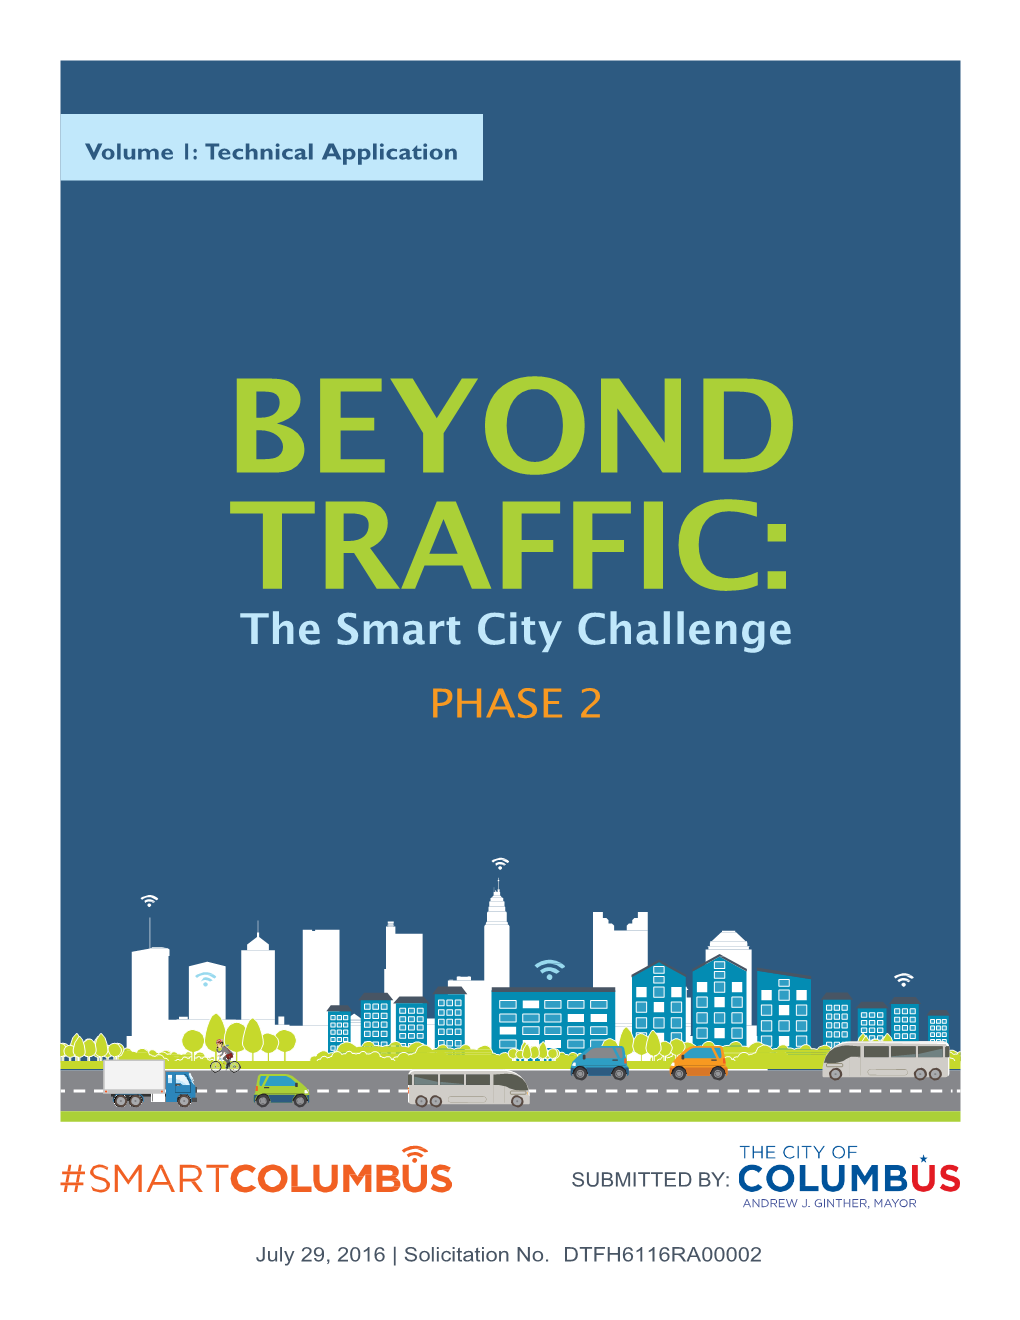 The Smart City Challenge PHASE 2